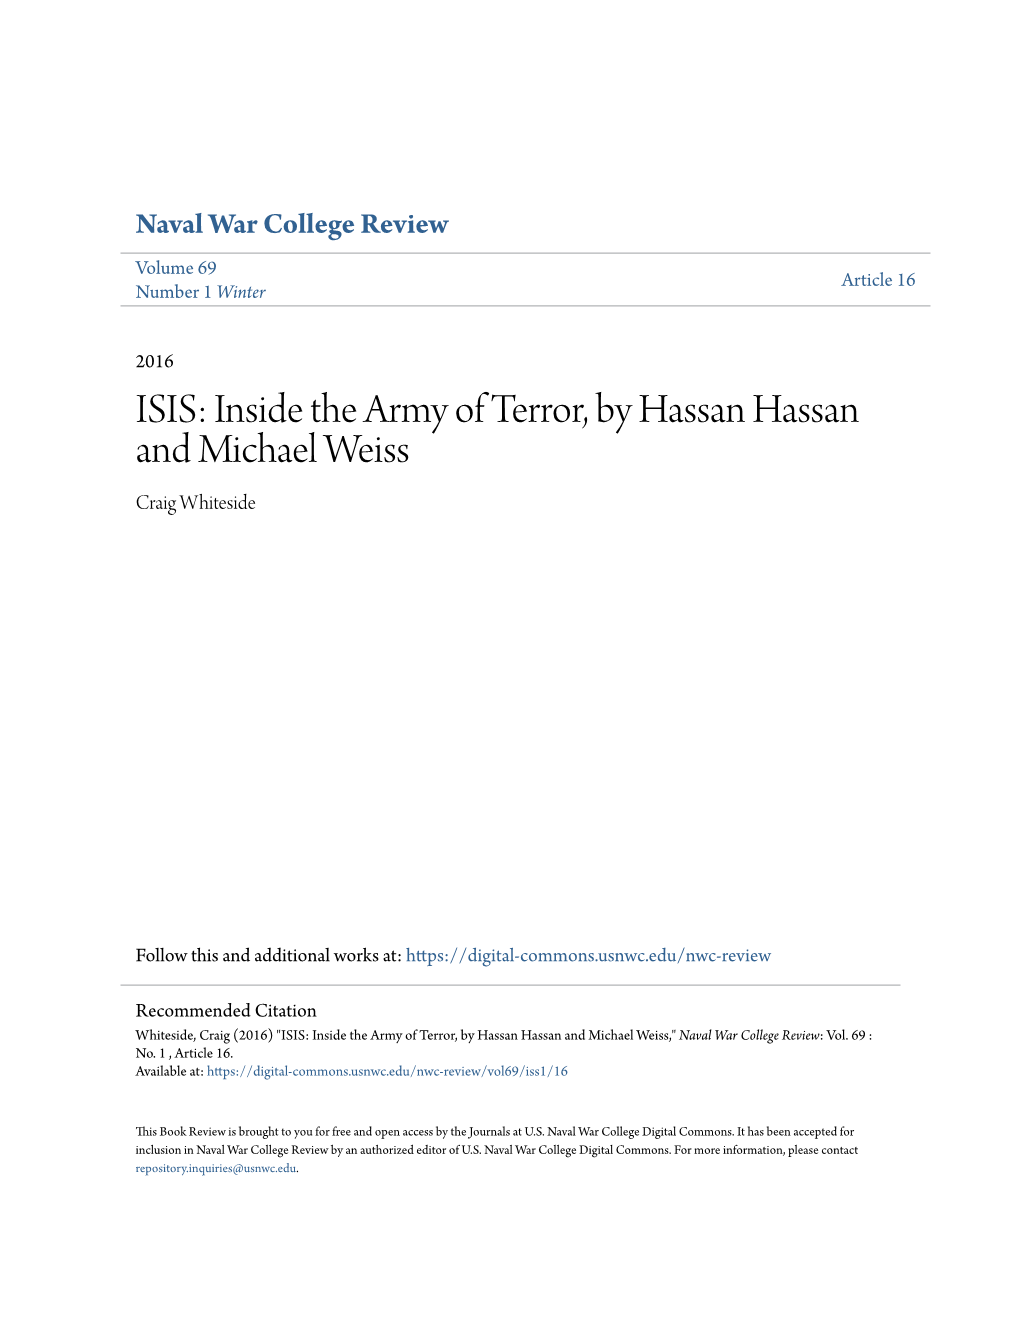 ISIS: Inside the Army of Terror, by Hassan Hassan and Michael Weiss Craig Whiteside